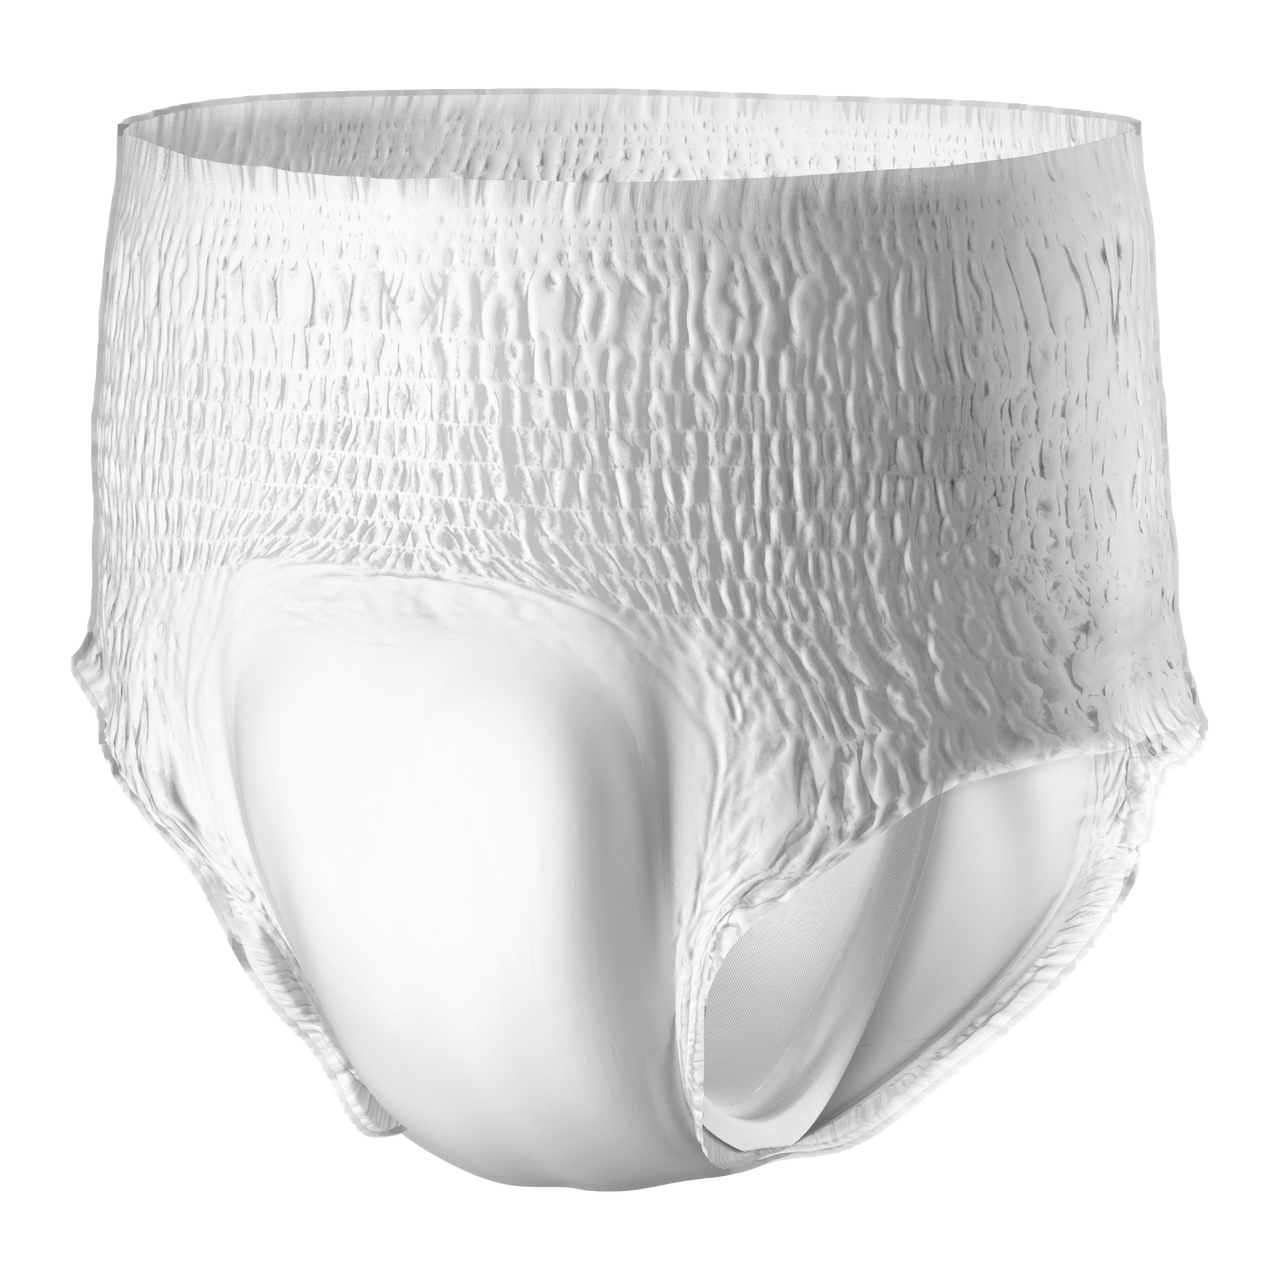 Prevail Per-Fit Adult Briefs, Diapers Medium White 32 - 44 - Qty: PK of  16 EA